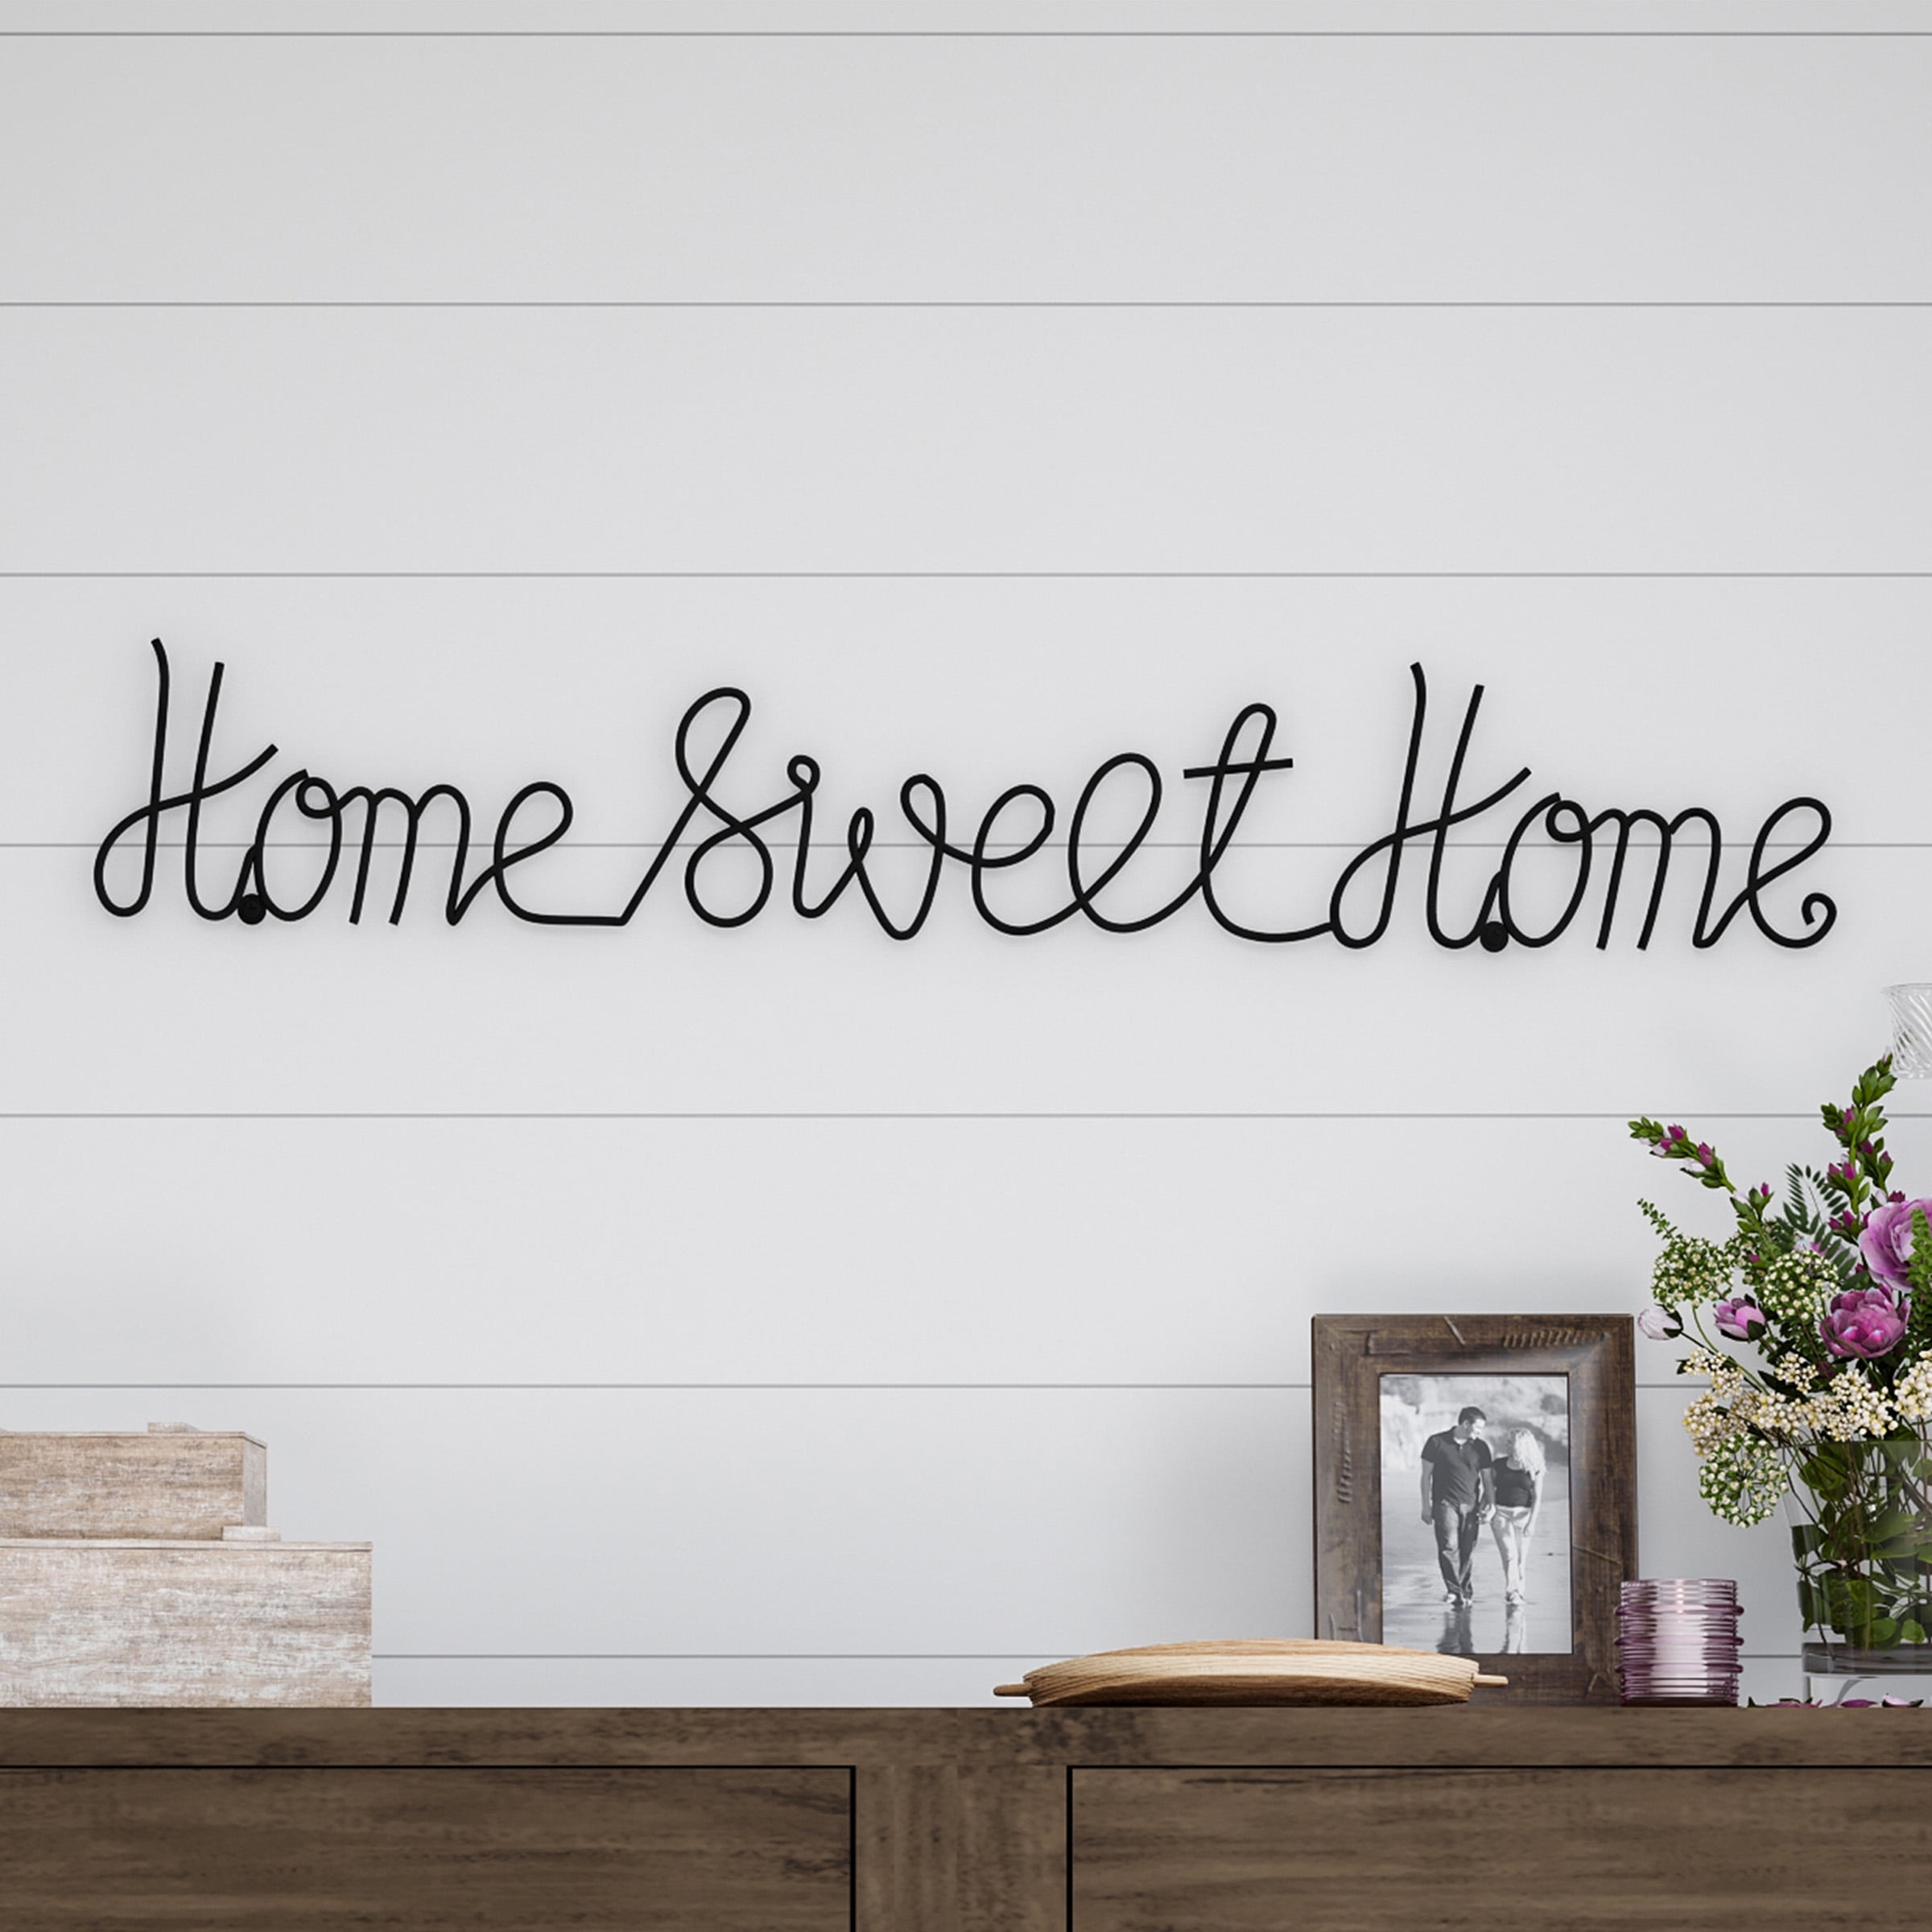 Vinyl Graphic Decal Sticker Can be Used for Vehicle Window Cooler Mirror Safe || High Quality Outdoor Rated Vinyl Home Sweet Home Sized for Farmhouse Canvas Metal or Framed Sign